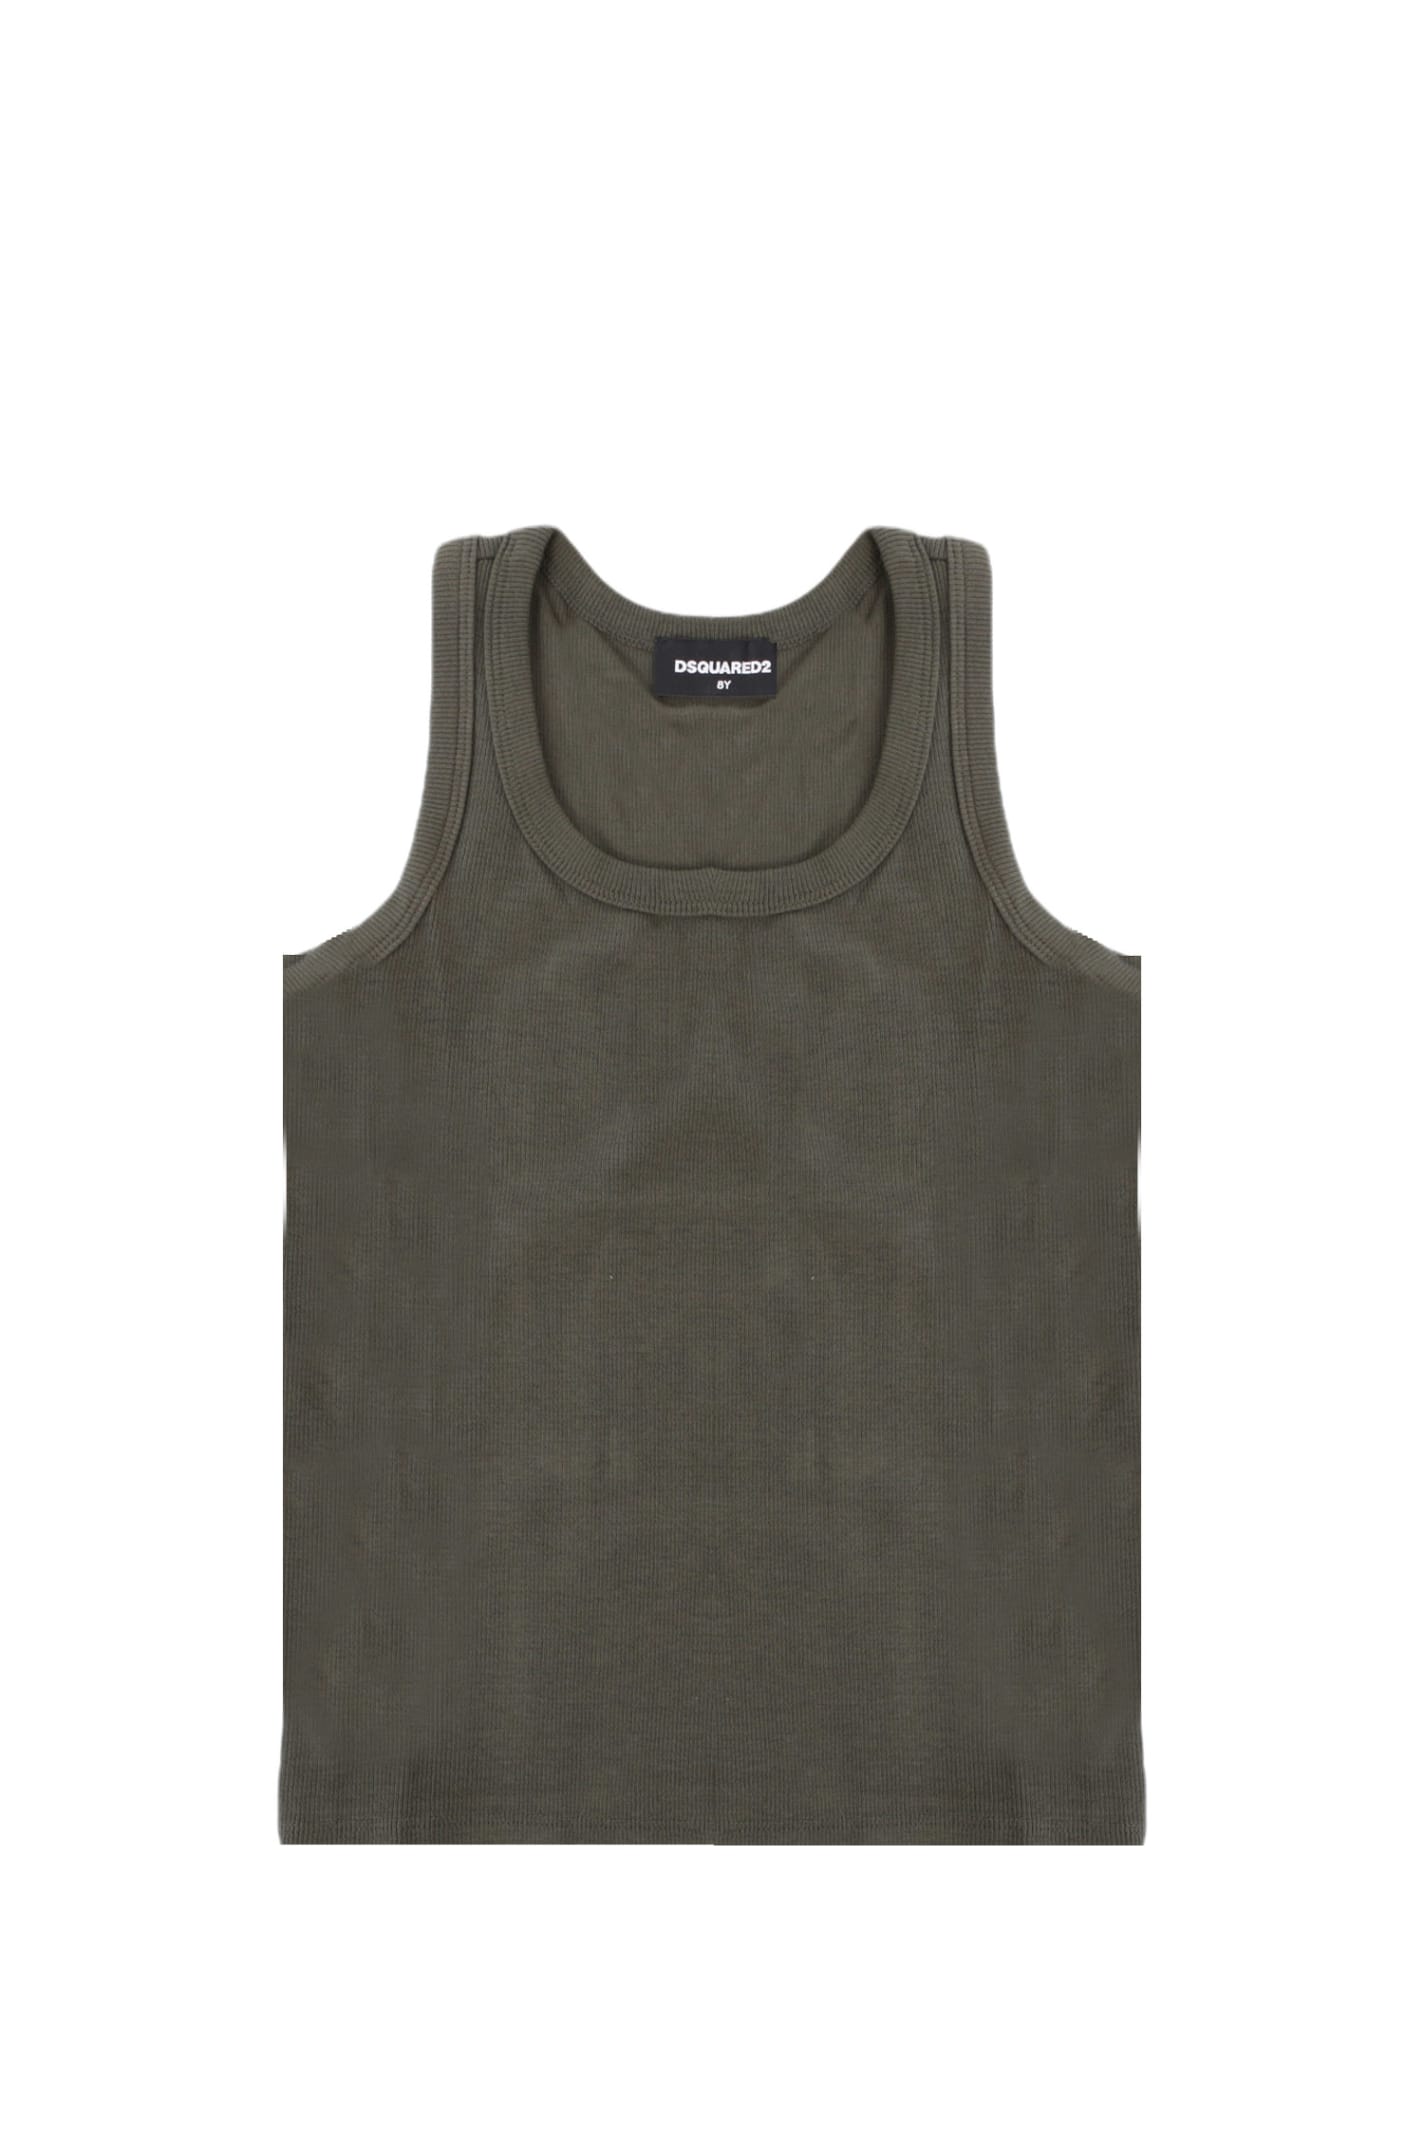 Dsquared2 Kids' Cotton Tank Top In Green